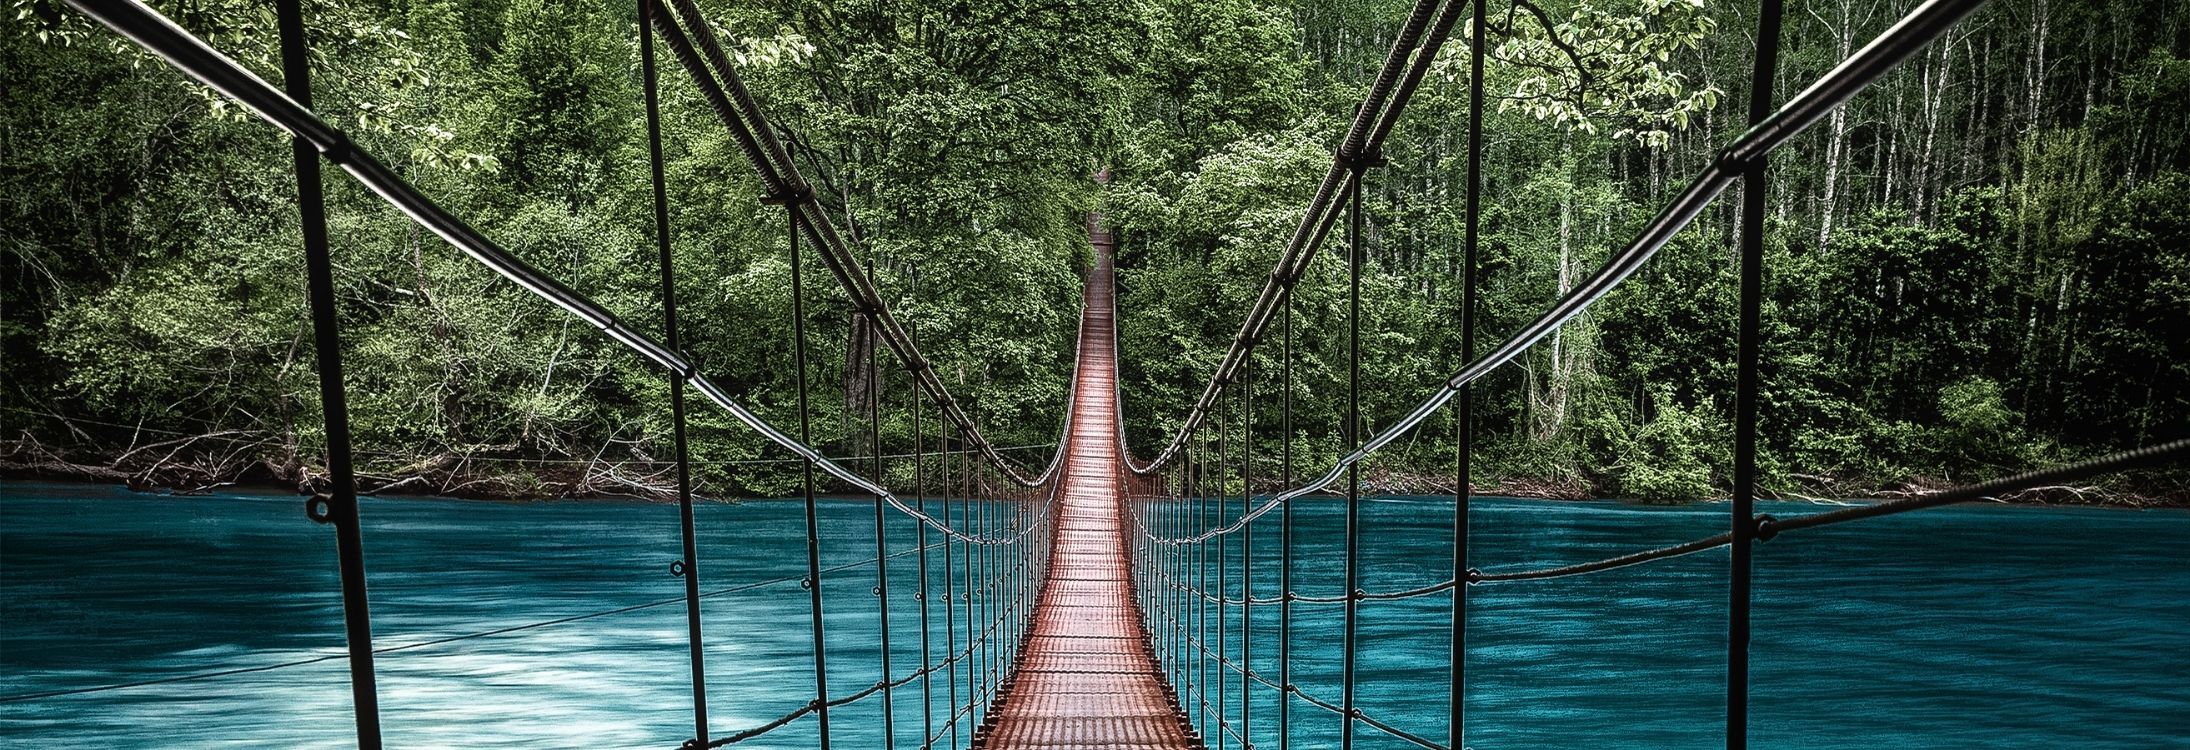 5 Dangerous Bridges You Need To Cross Once In Your Lifetime